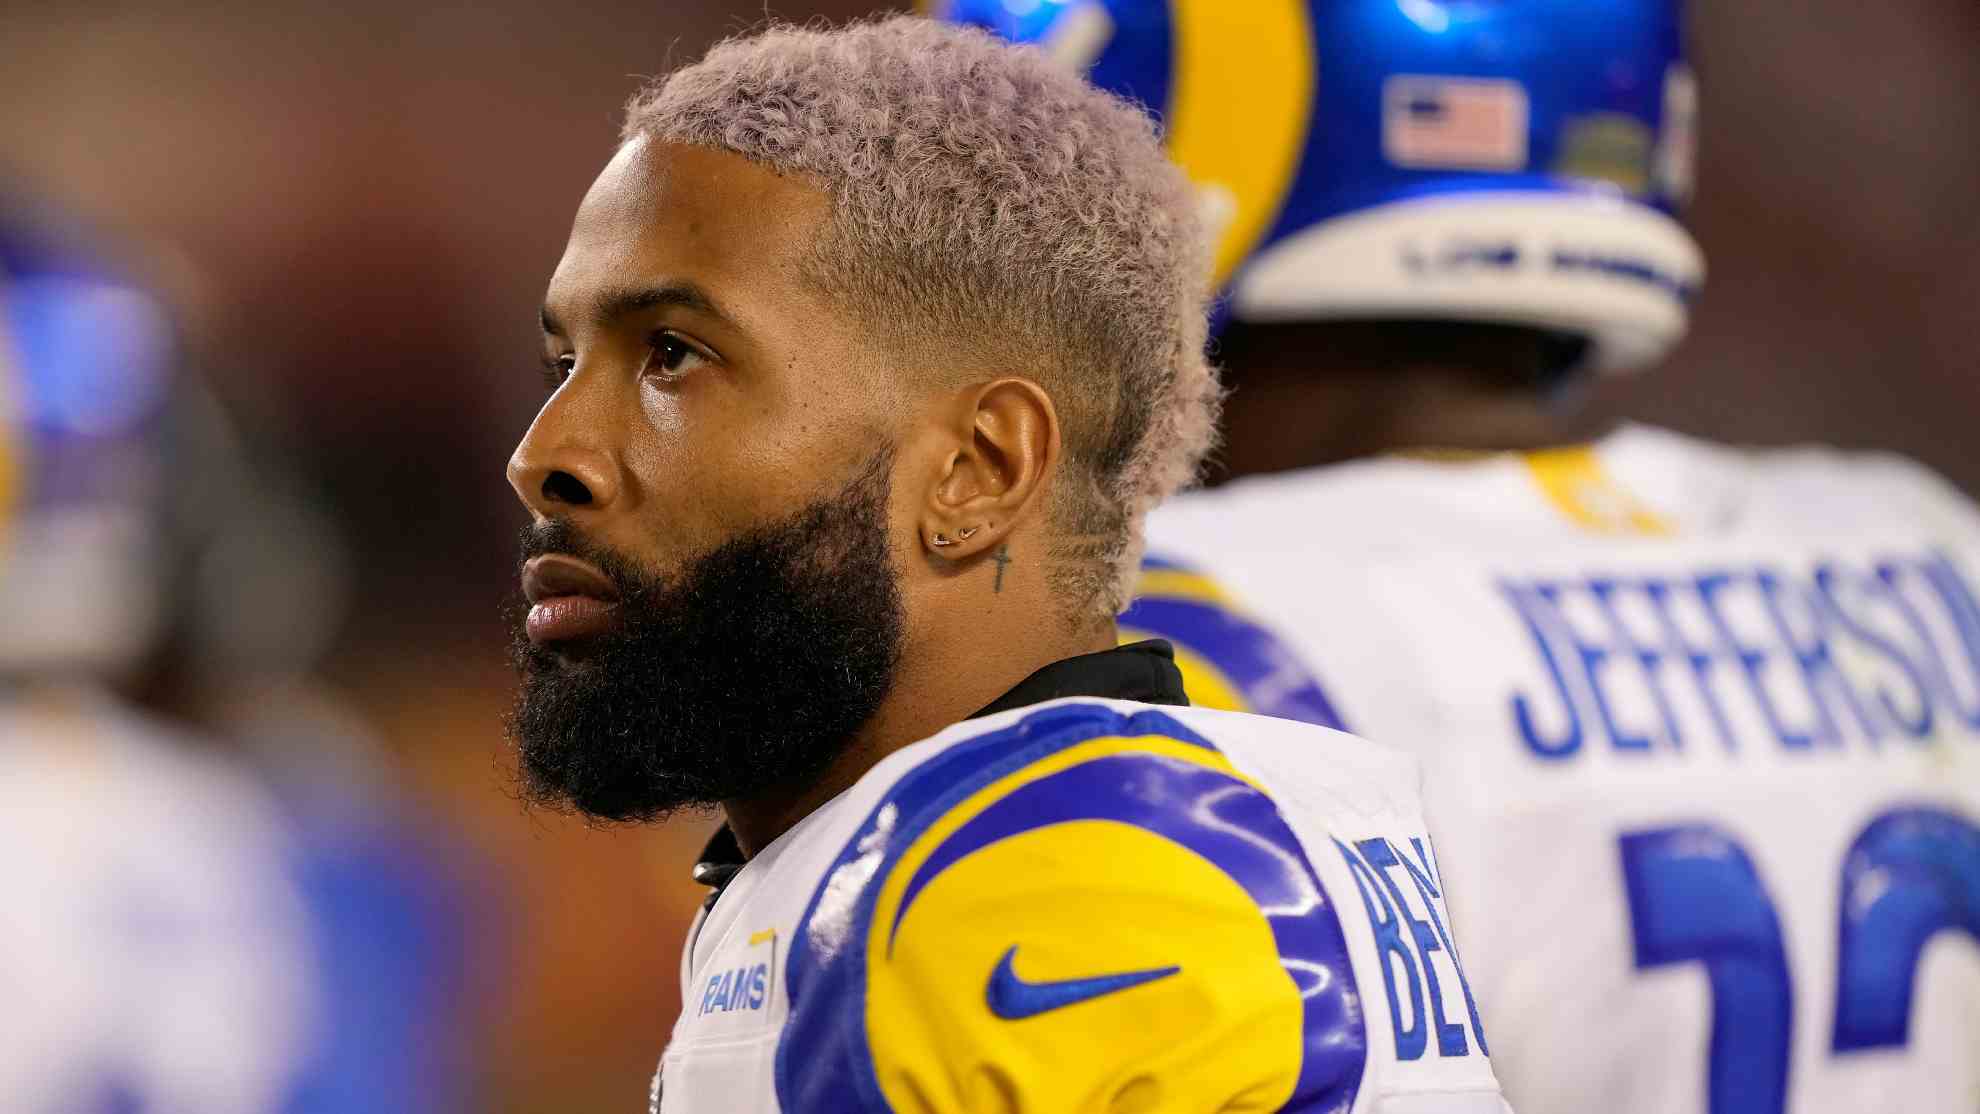 Disastrous Rams debuts for Odell Beckham Jr. and Von Miller